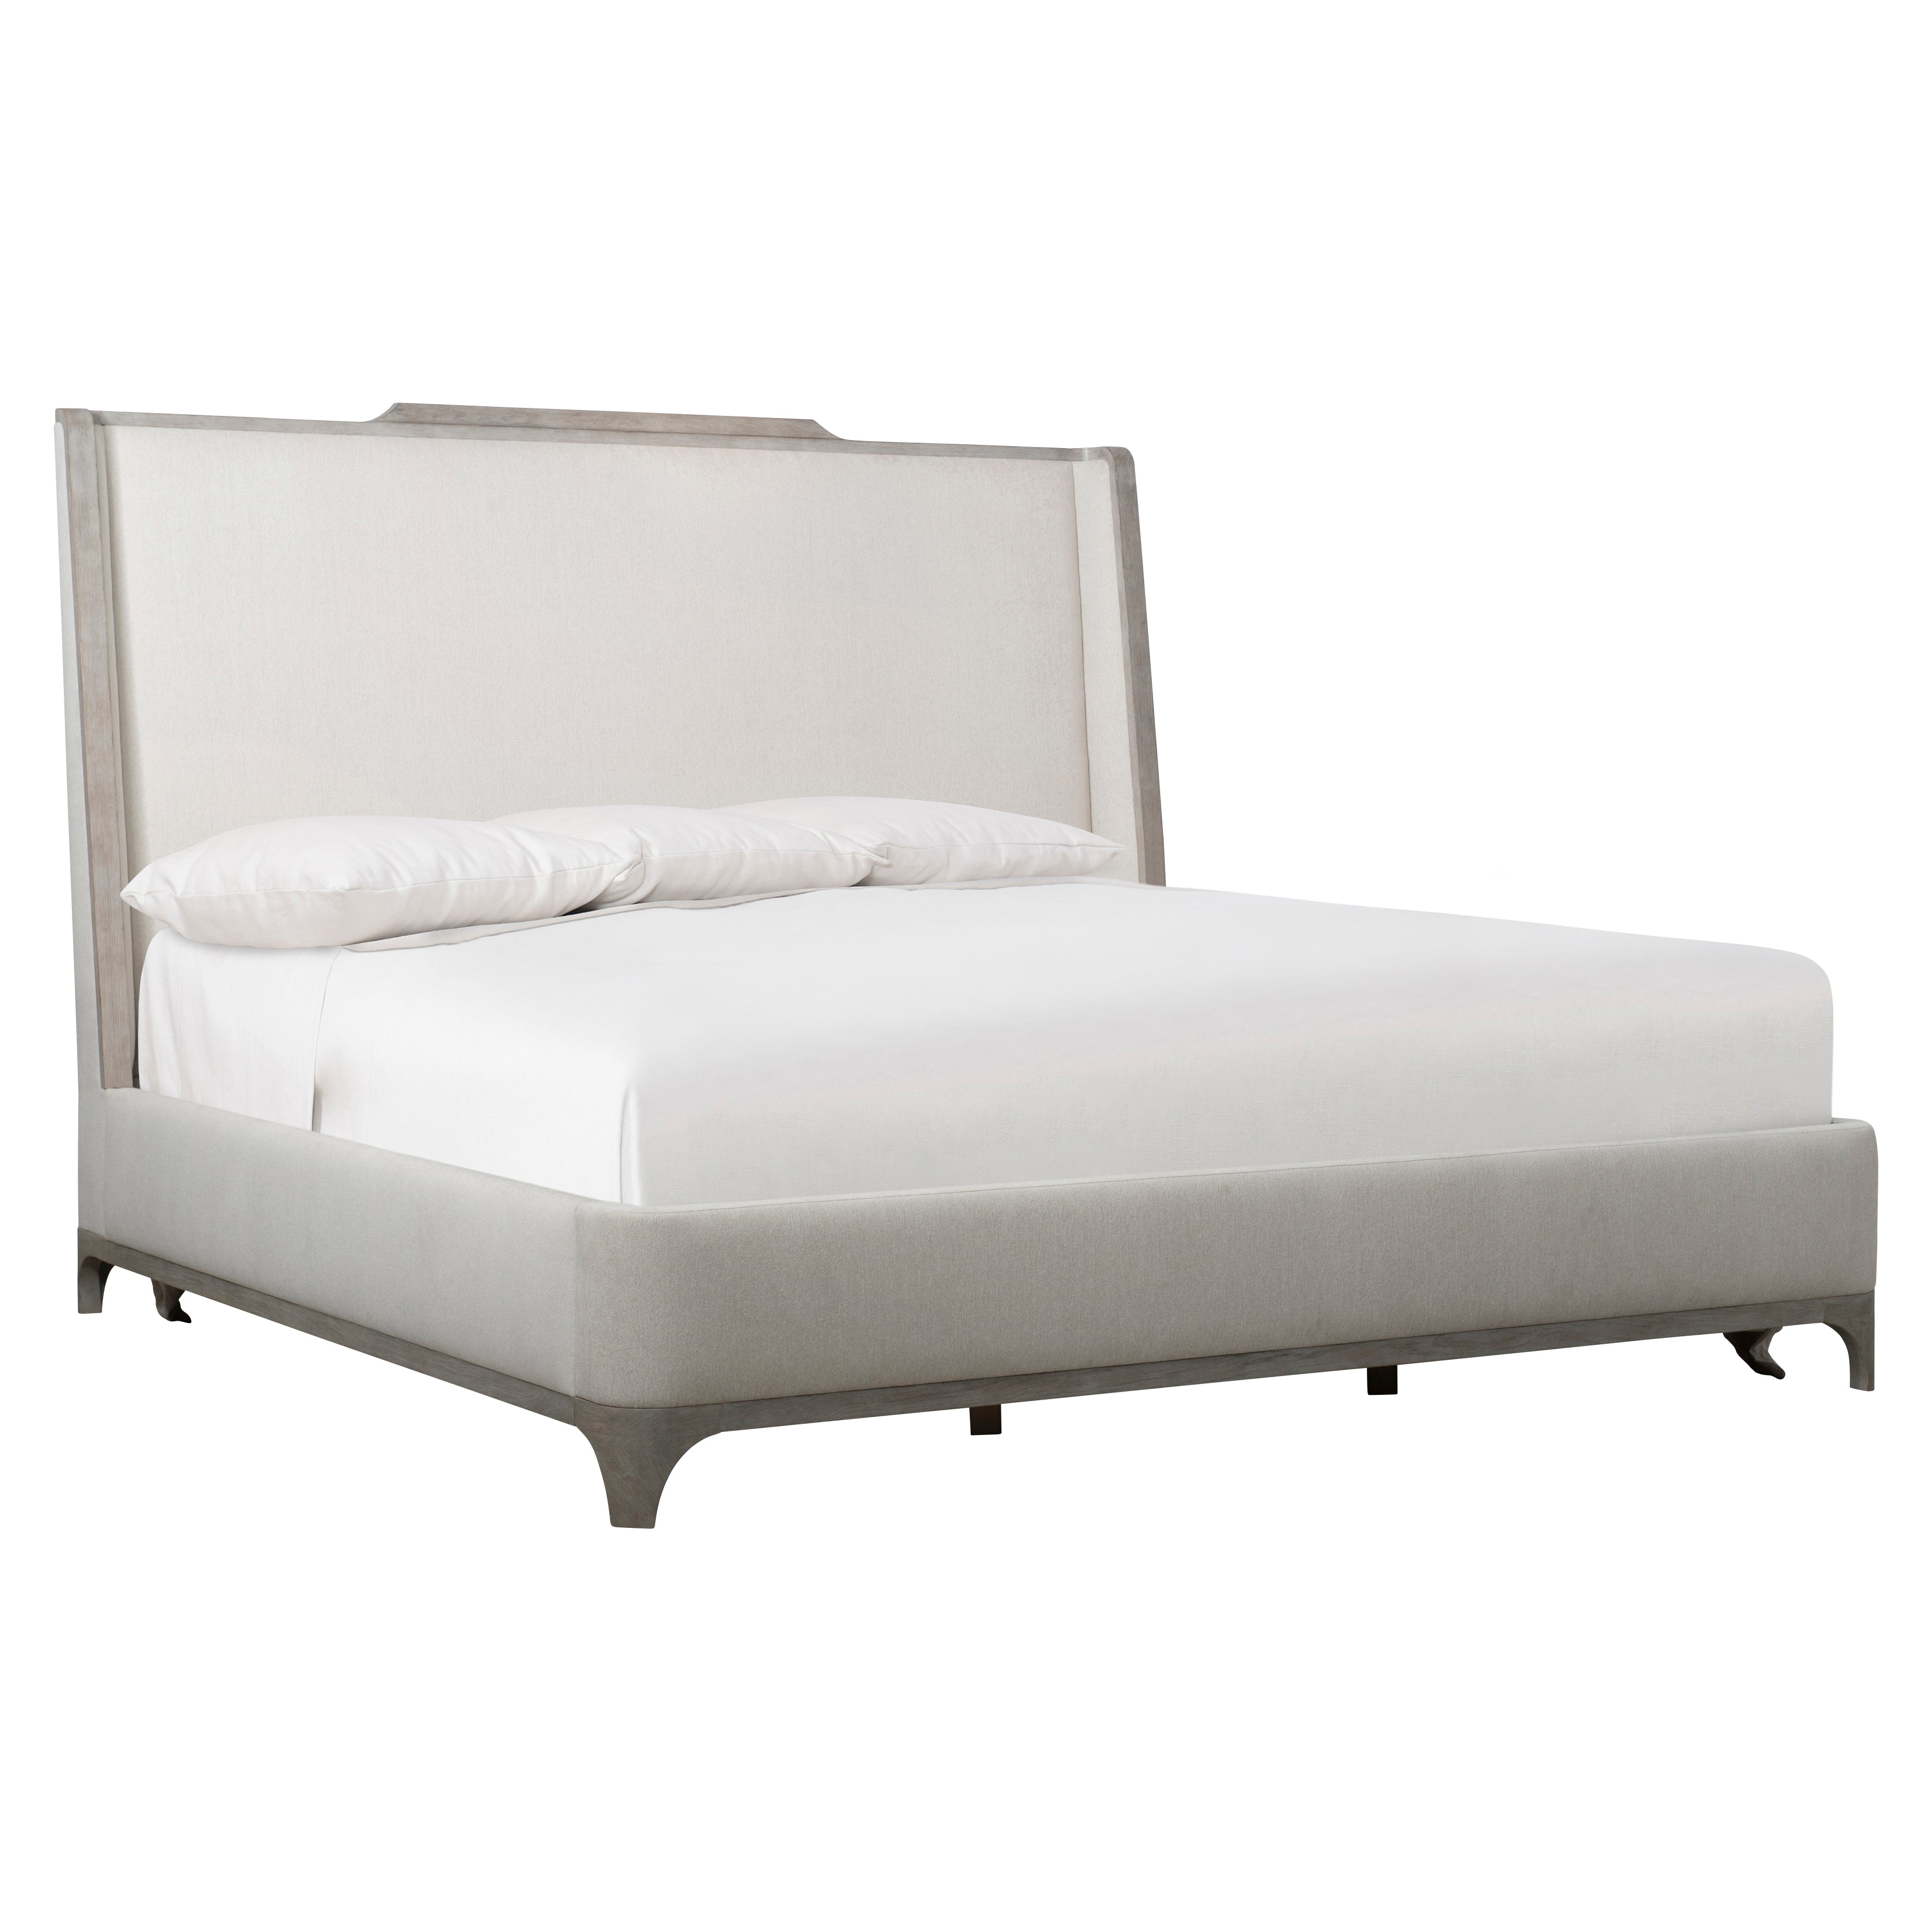 Albion Queen Upholstered Shelter Bed